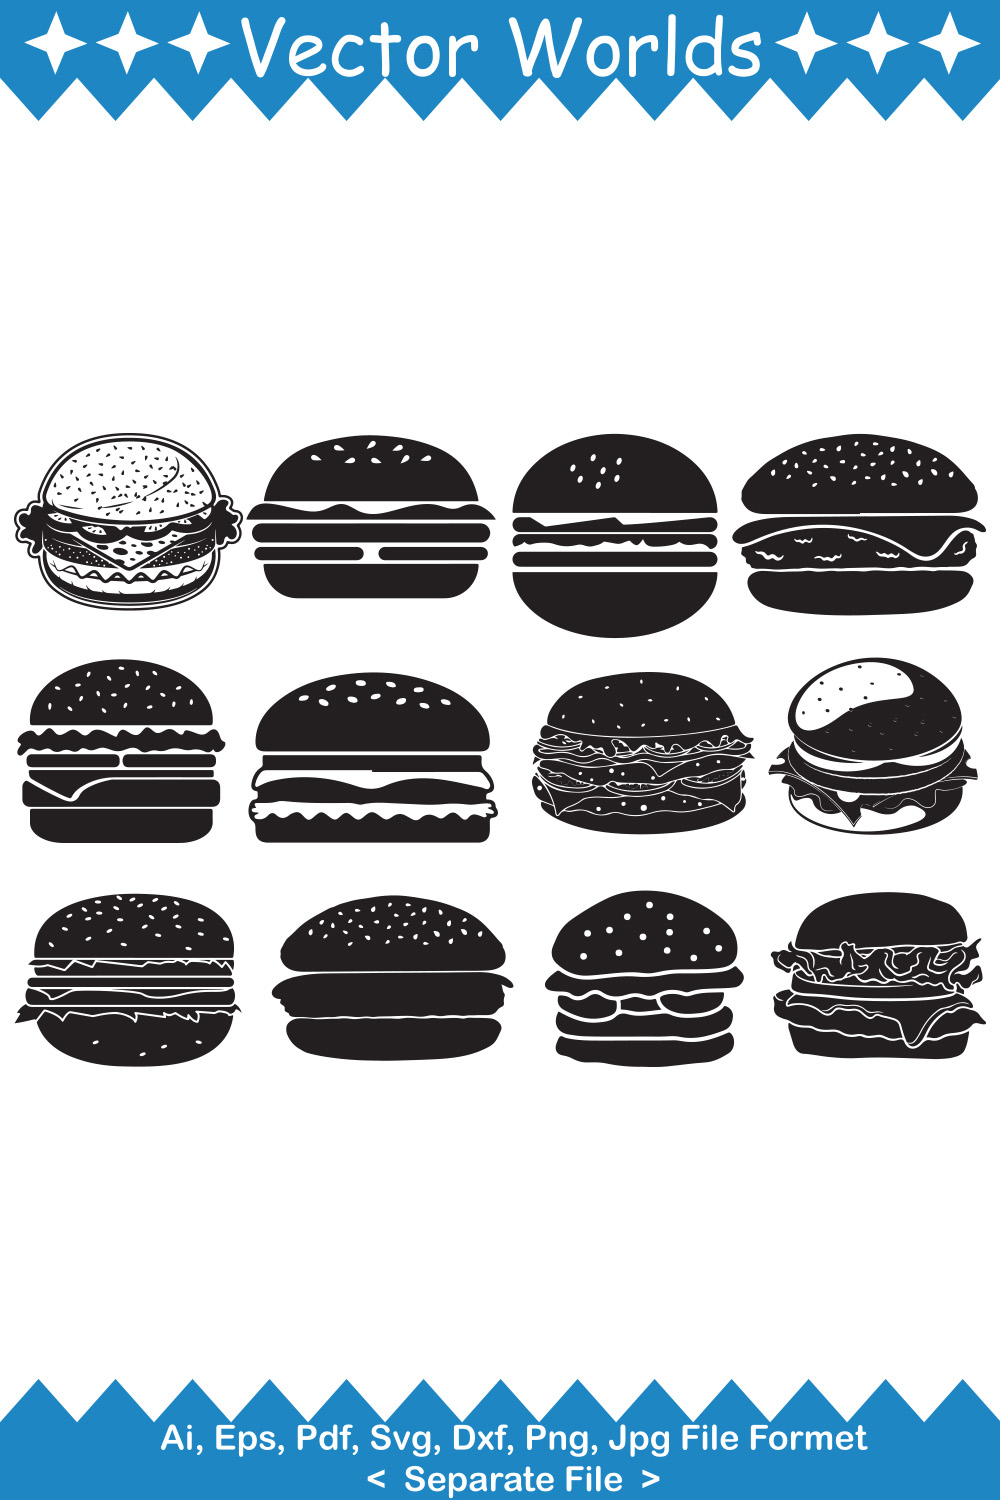 Pack of vector irresistible burger silhouette images.